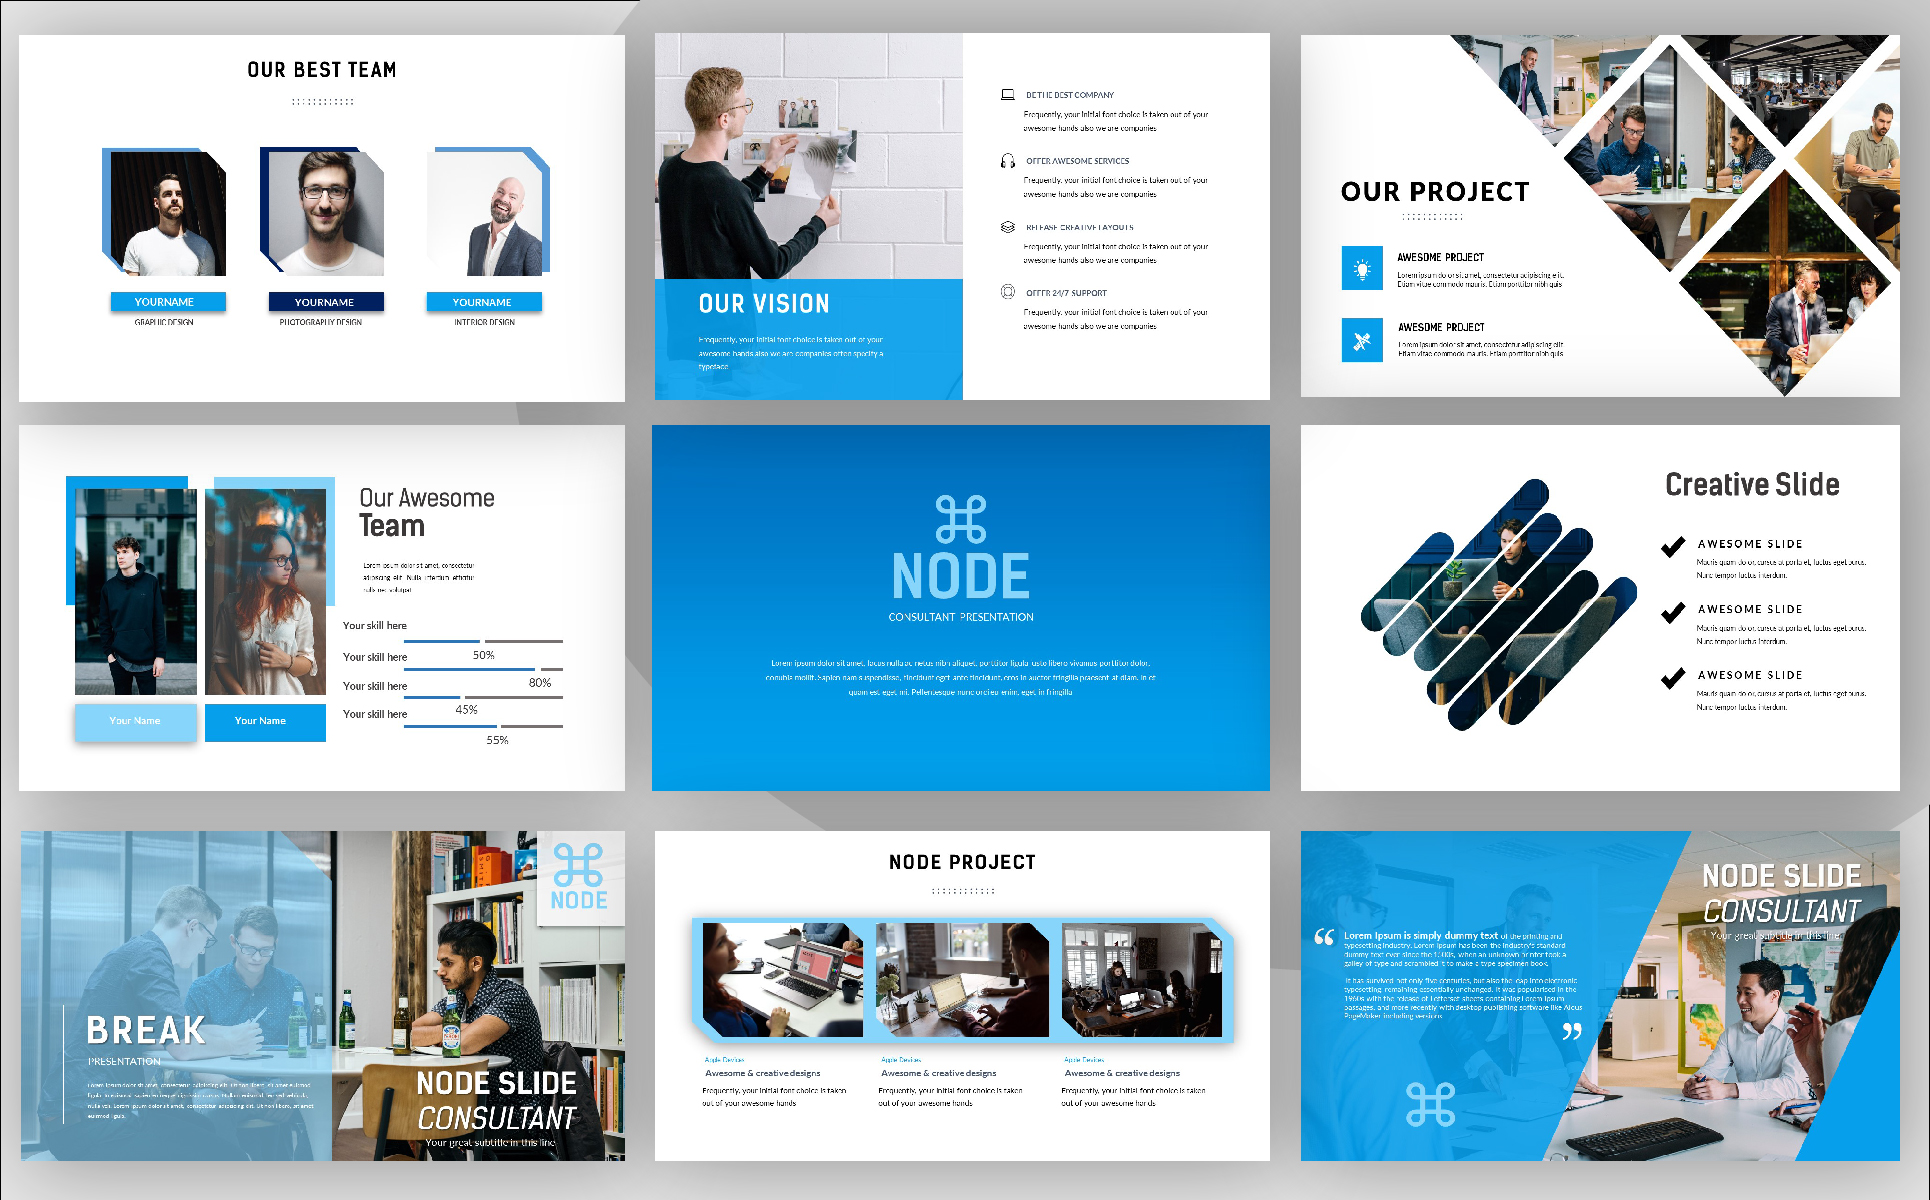 Node Consultant PowerPoint template